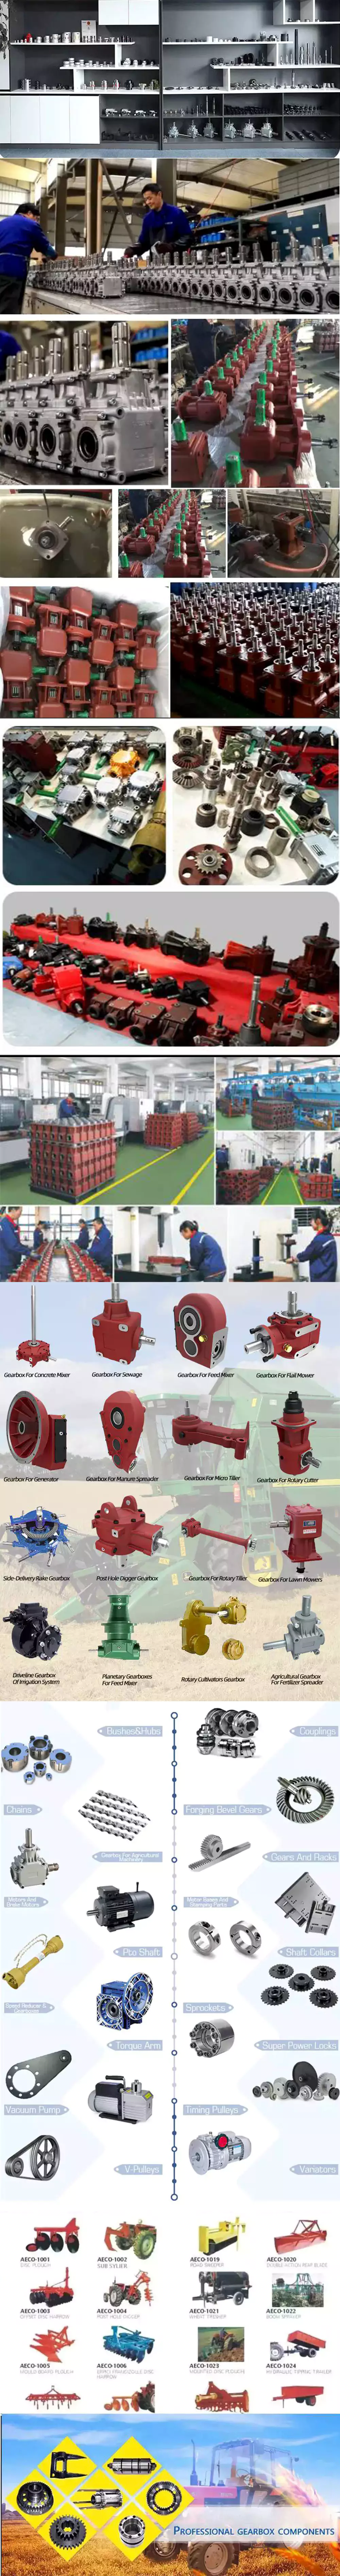 China OEM Nmrv Series Worm Gearbox with Speed Variator   agricultural gearbox equipment	